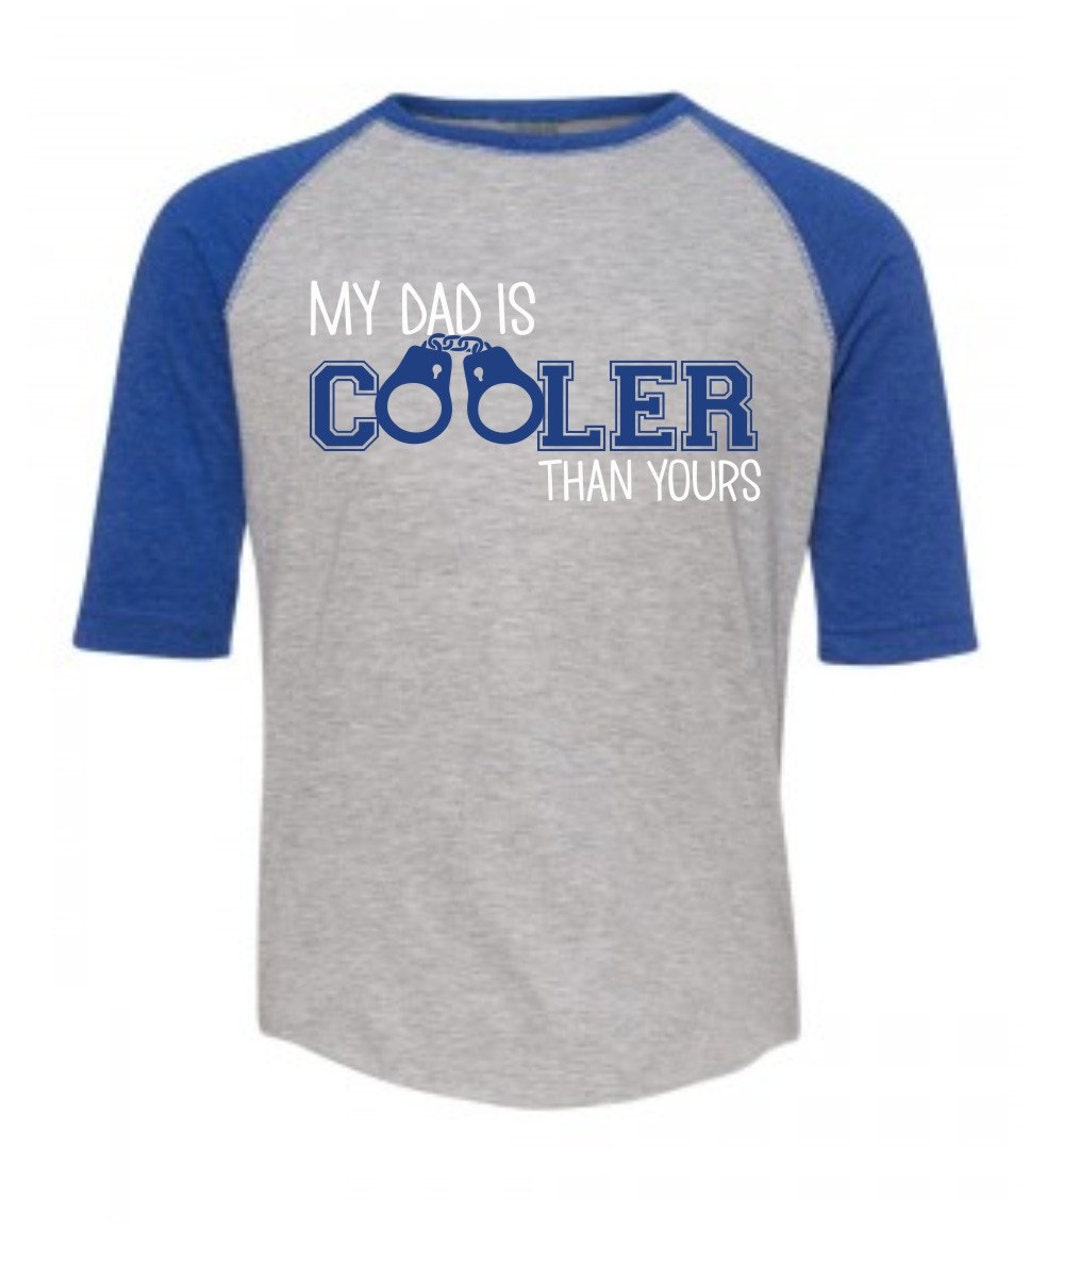 Police Kid Tshirt Police Baby Shirt My Dad is Cooler Shirt - Etsy